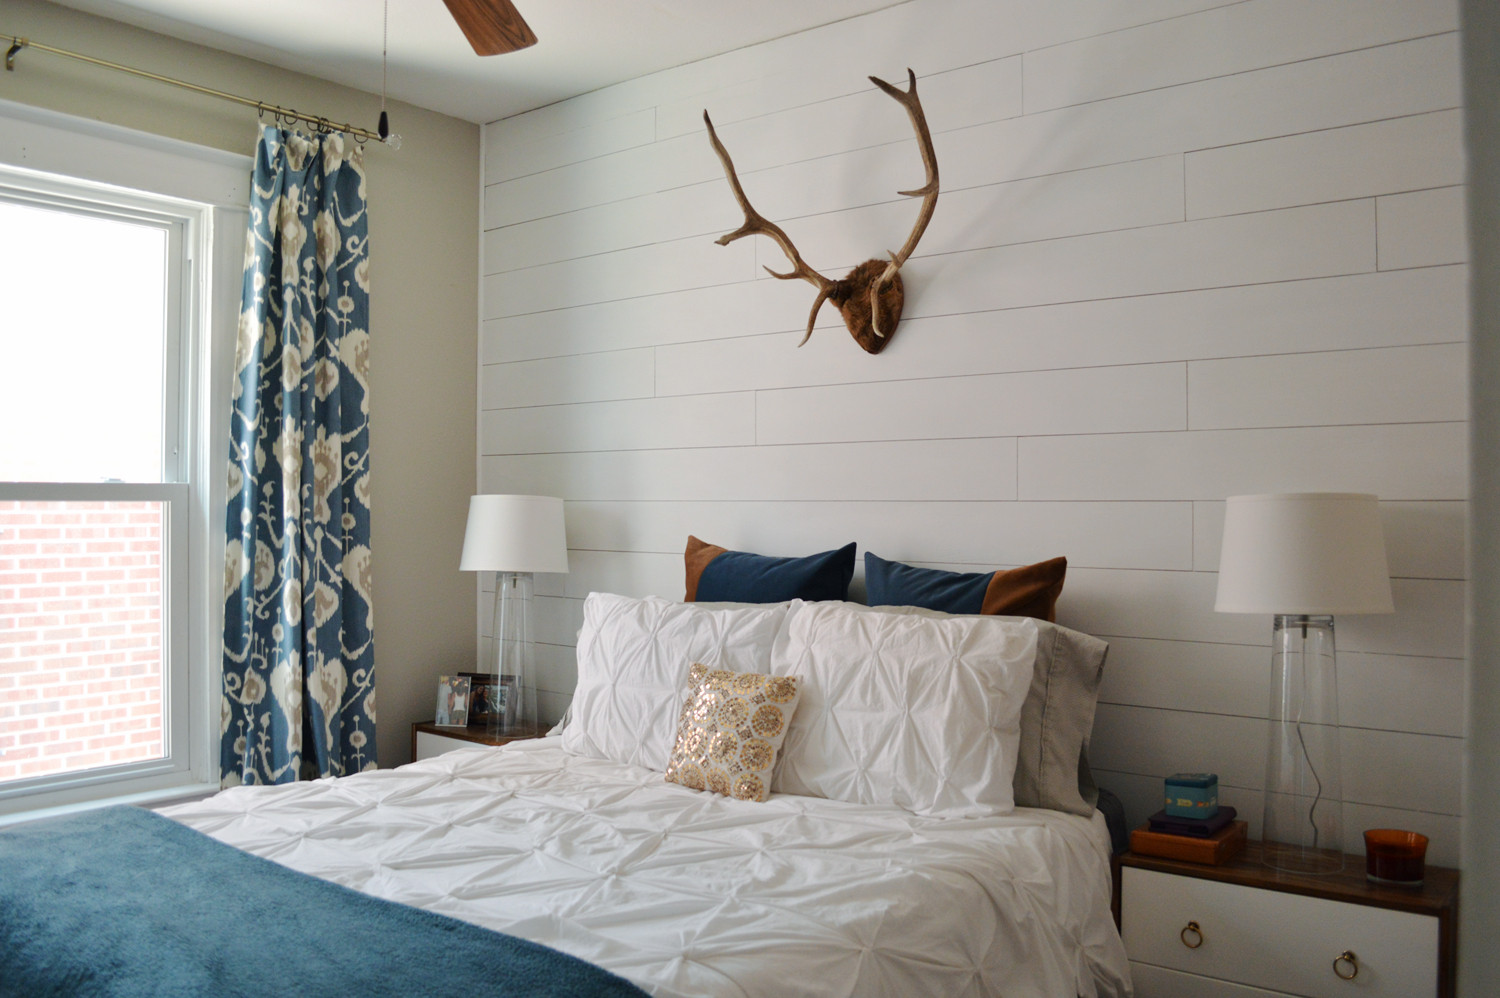 Wooden Wall In Bedroom
 weathered wood wall